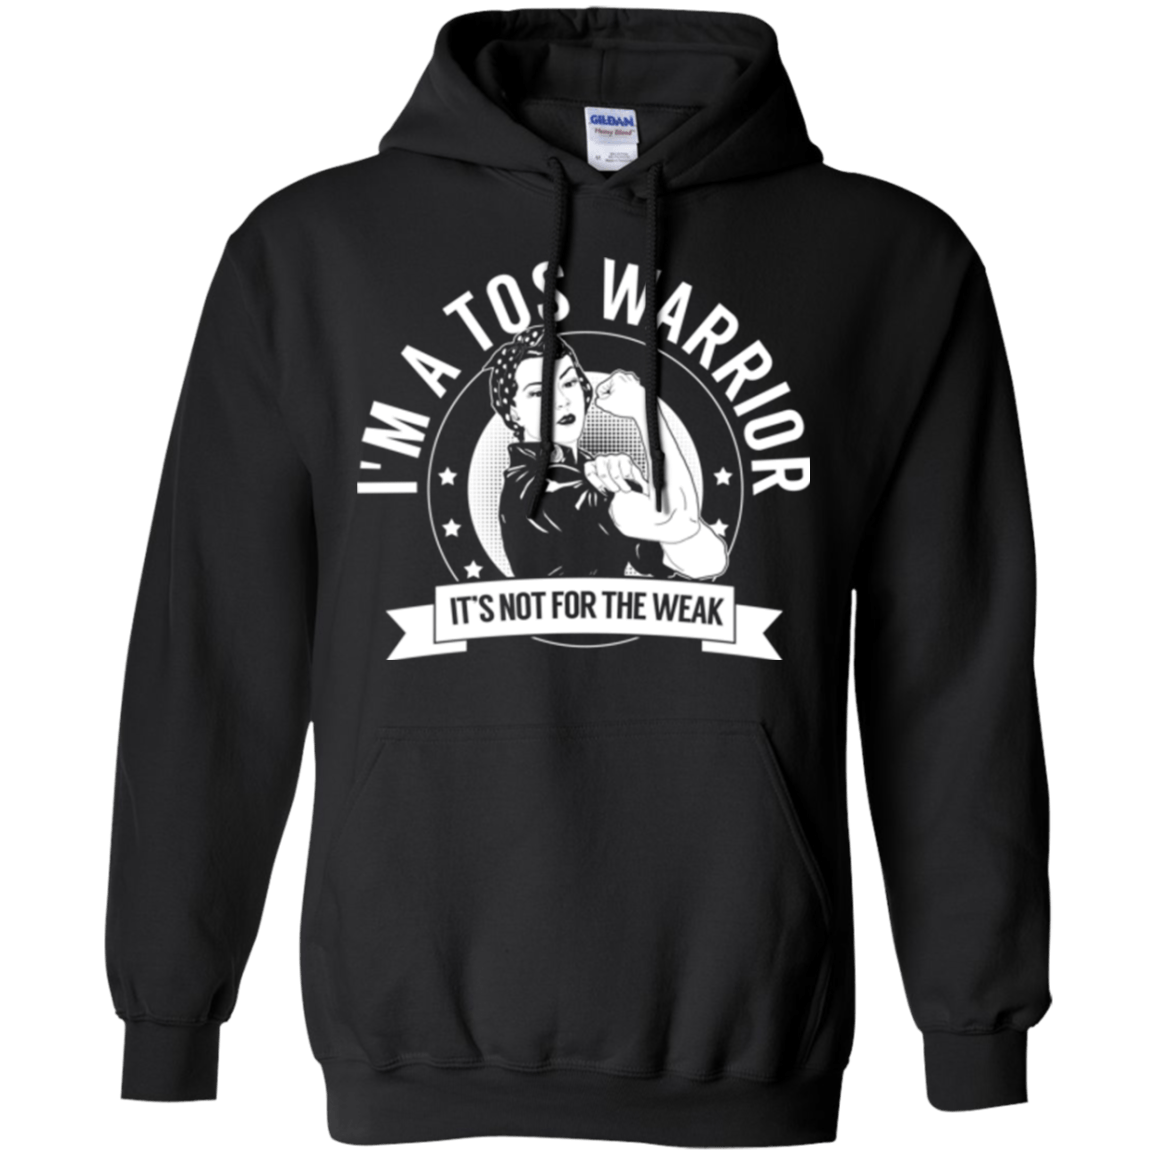 Thoracic Outlet Syndrome - TOS Warrior Not For The Weak Pullover Hoodie 8 oz. - The Unchargeables